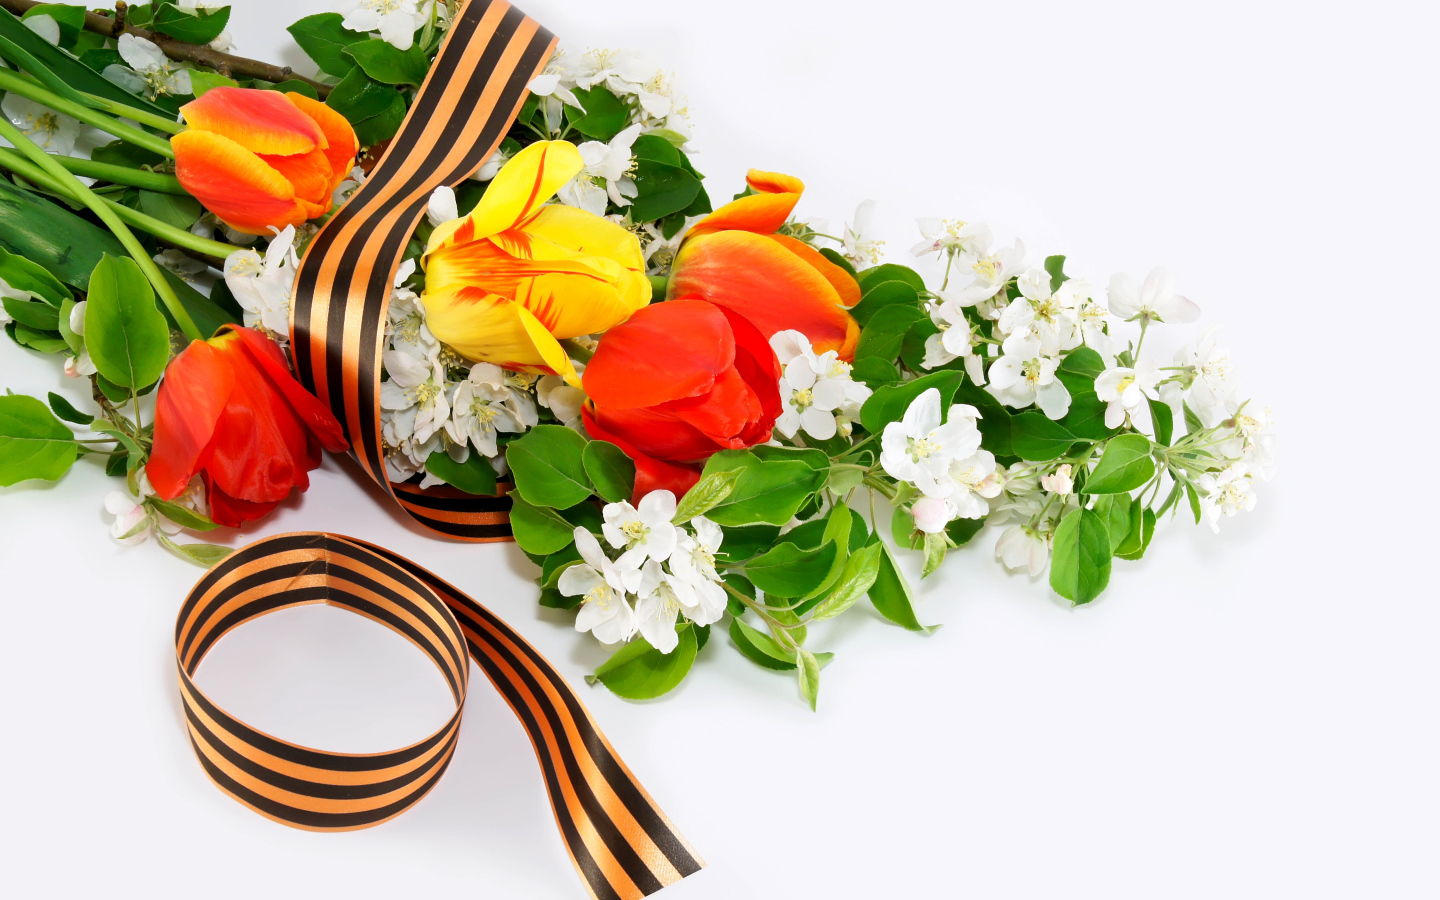 Flowers and St. George ribbon on May 9th on a white background